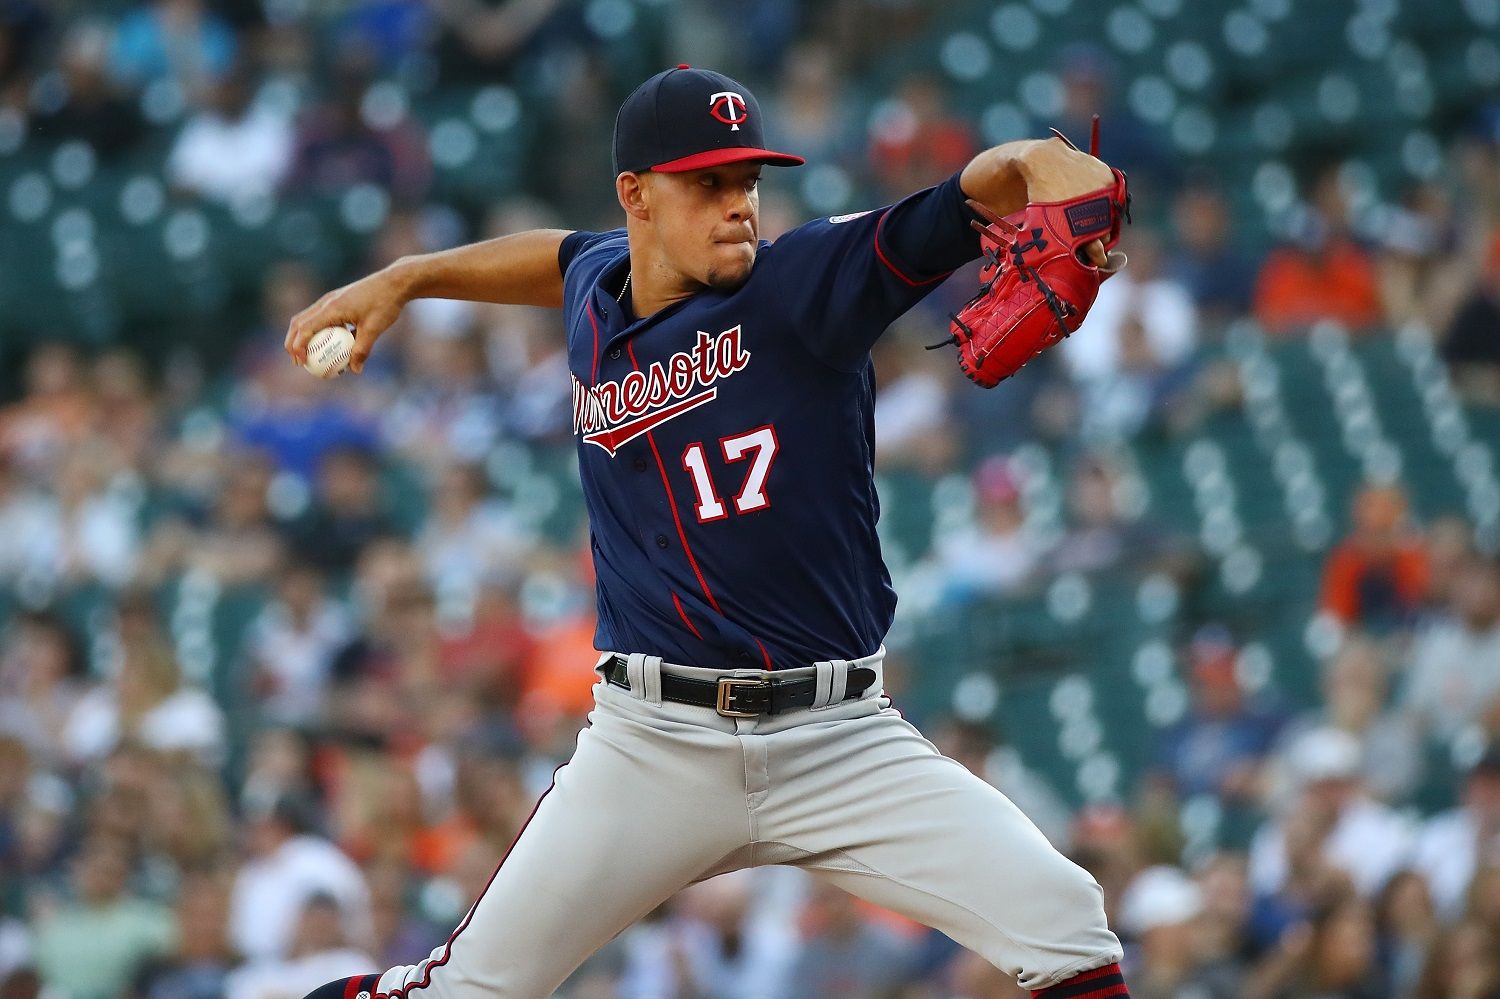 A detailed view of the Under Armour glove worn by Jose Berrios of the  News Photo - Getty Images